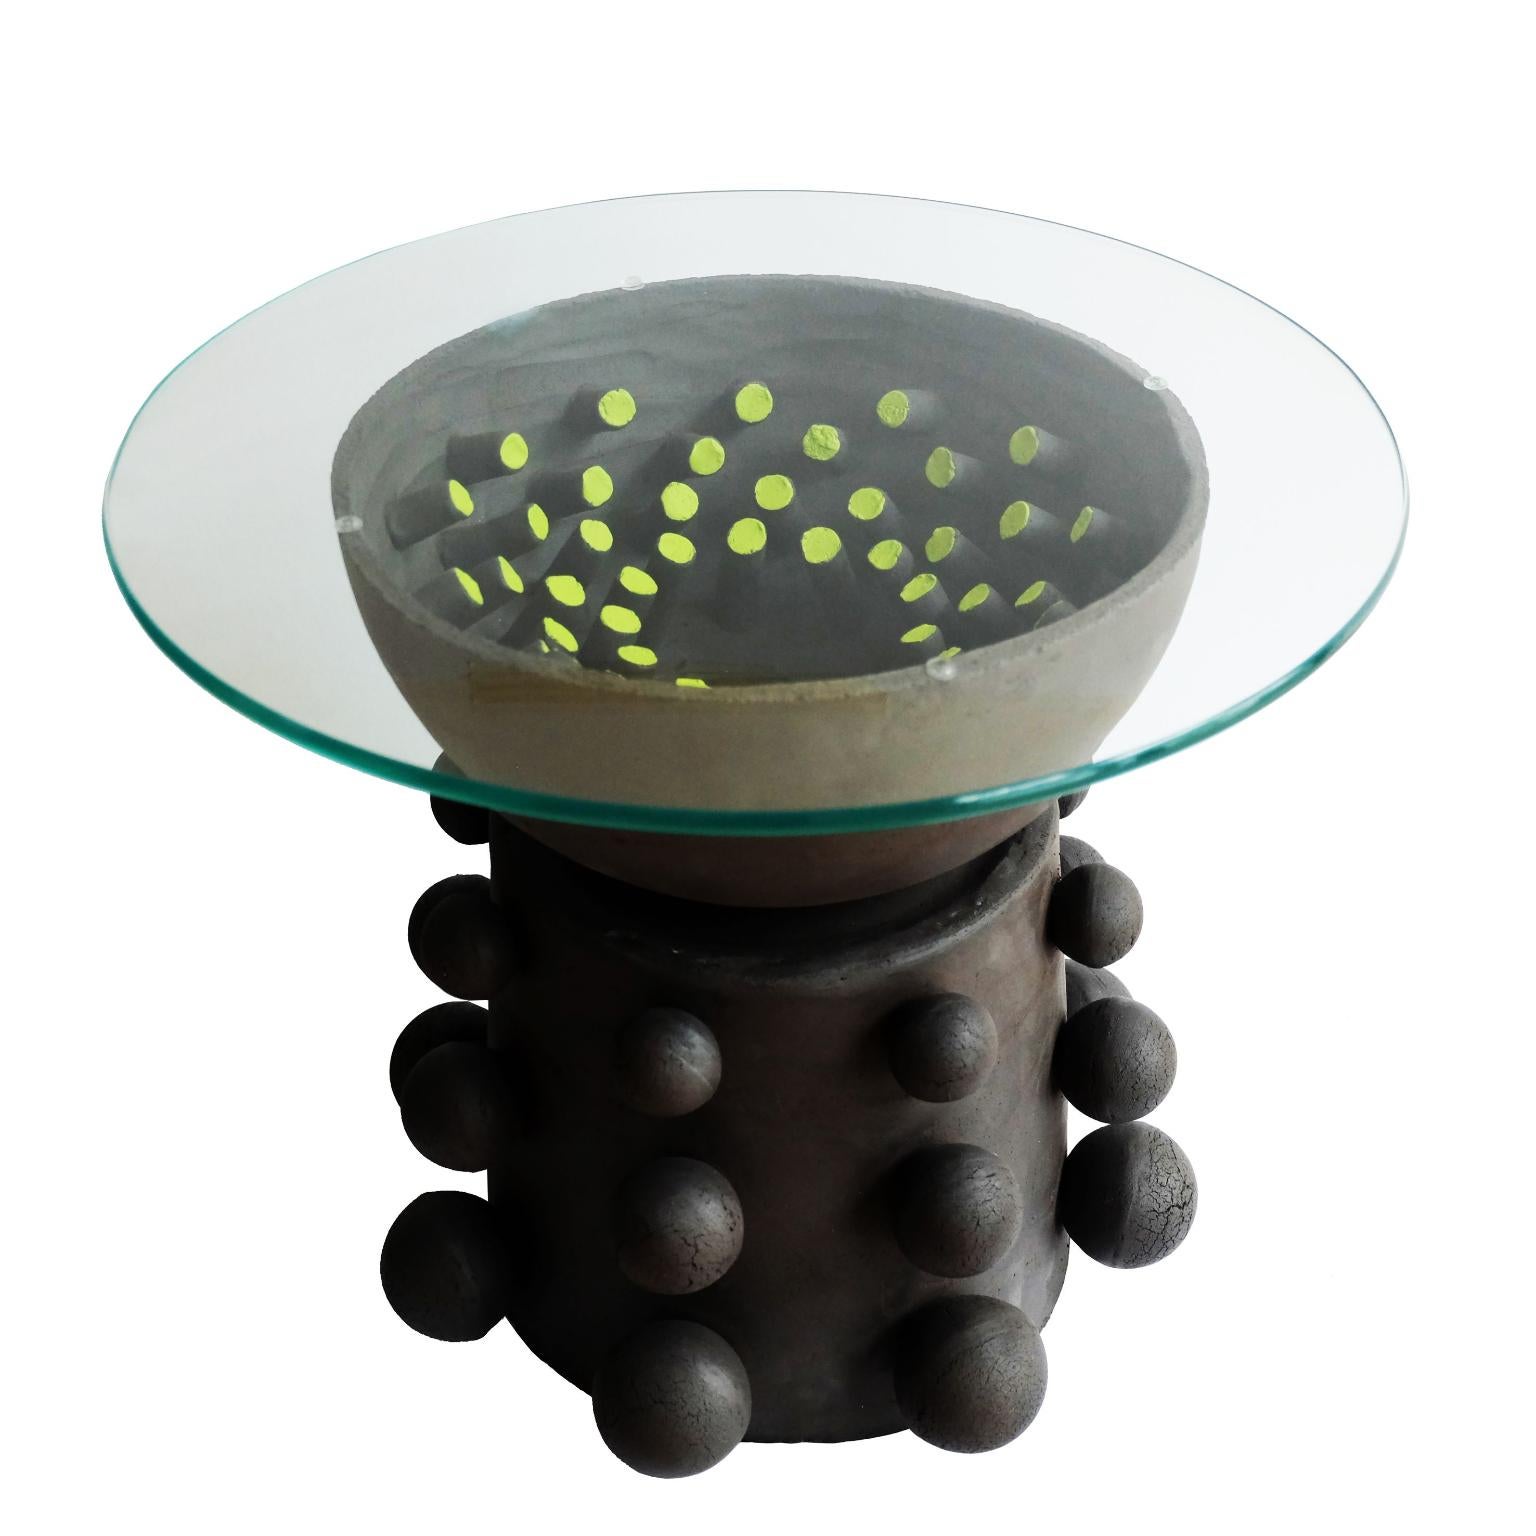 Sculptural Fibrobla table by Ia Kutateladze
Dimensions: W 35 x H 44 cm
Materials: Raw Black Clay, Glass

“Playground For Salvation” was created entirely during quarantine, in my Berlin studio. The stillness of the lockdown enabled me to